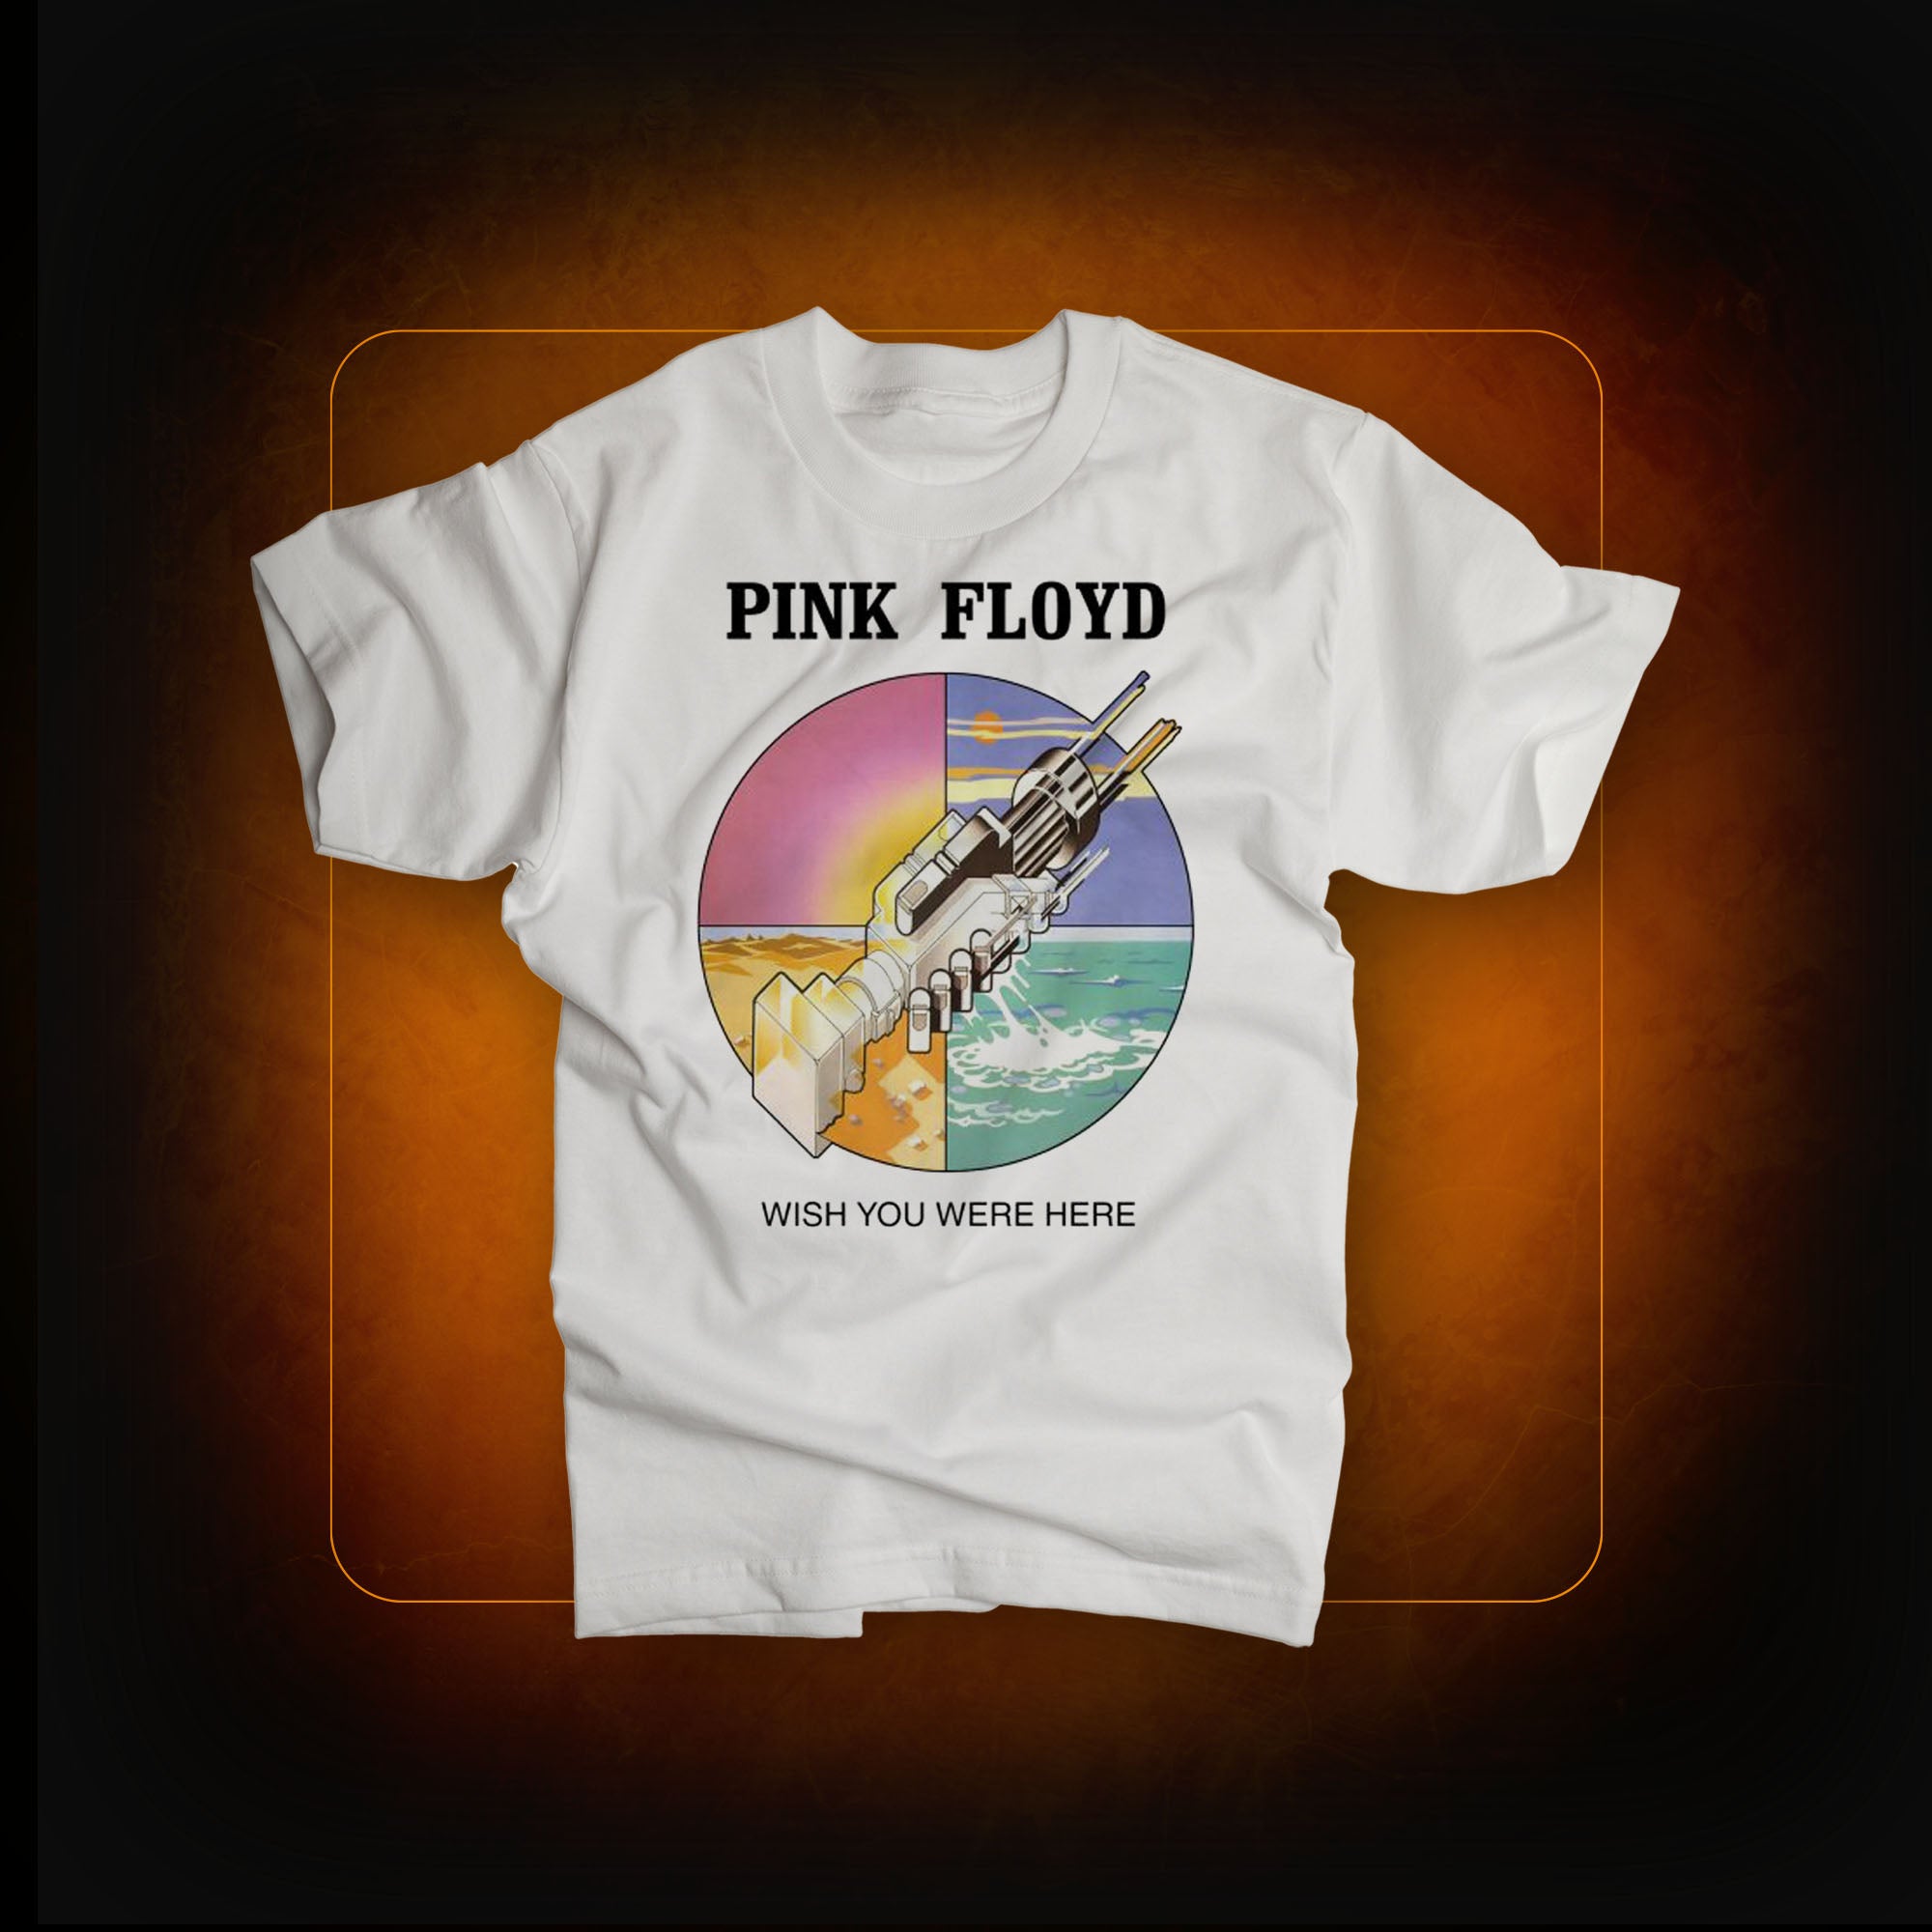 Wish You Were Here white t-shirt - Pink Floyd